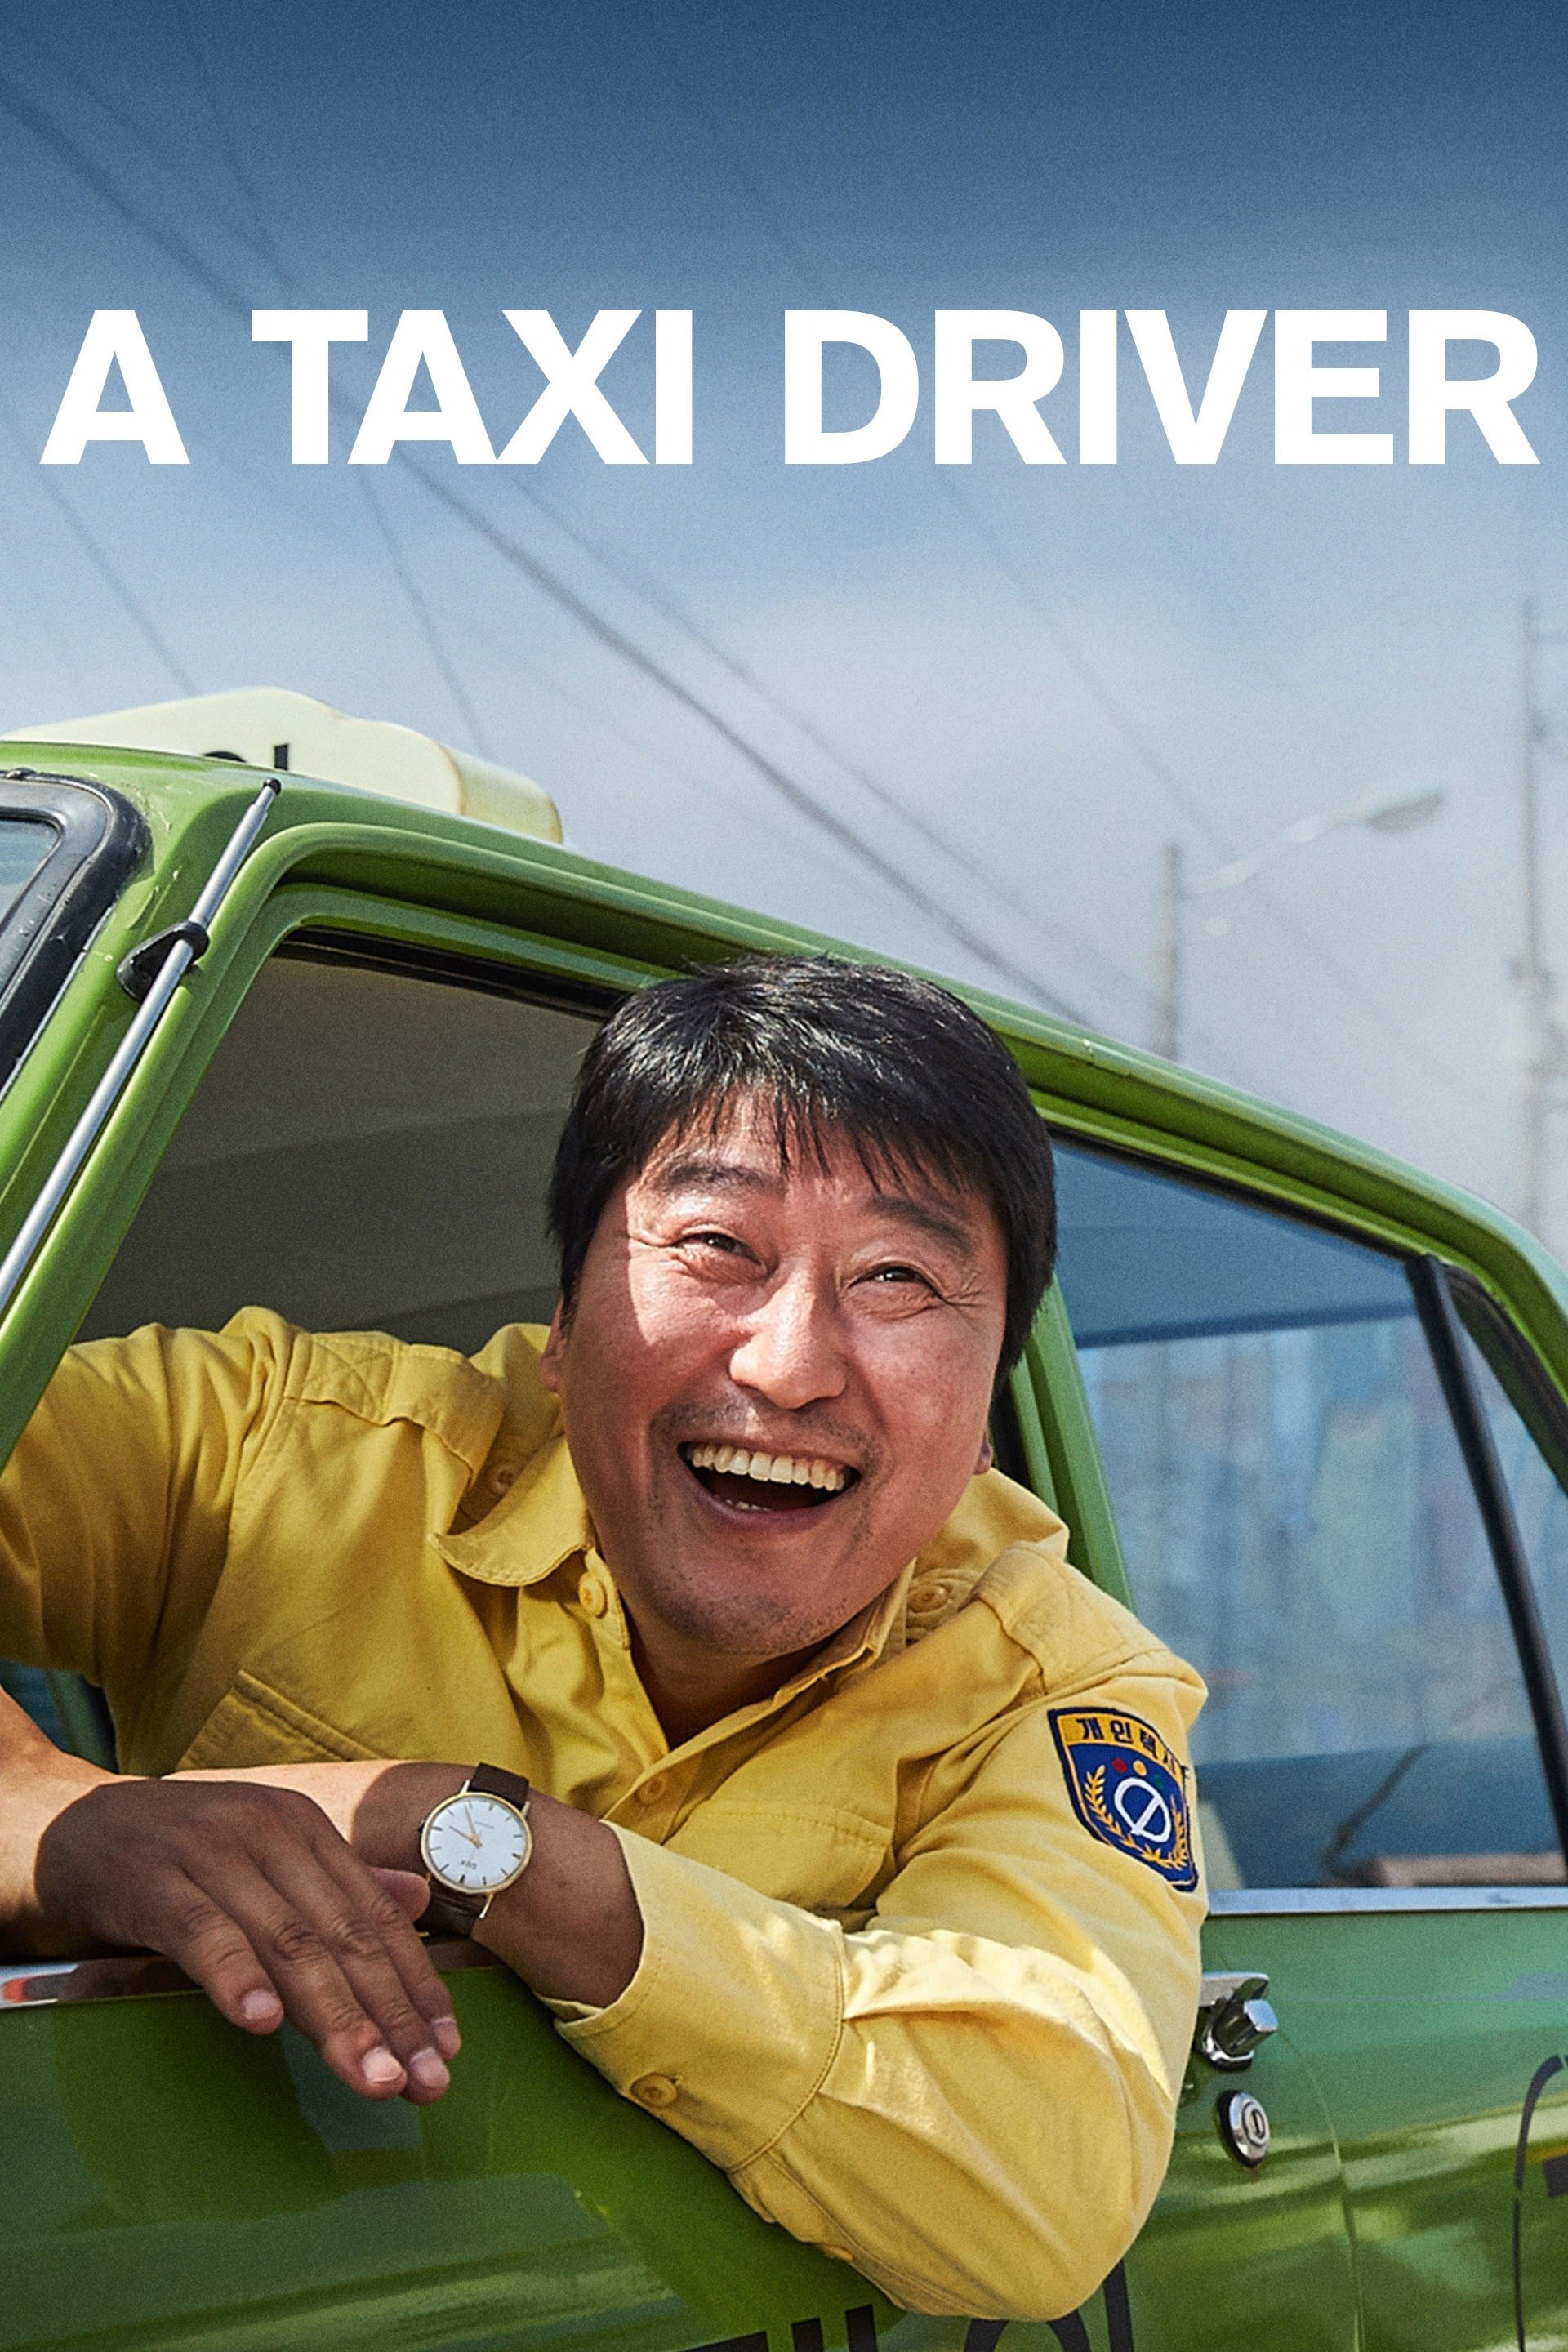 a taxi driver 2017 review